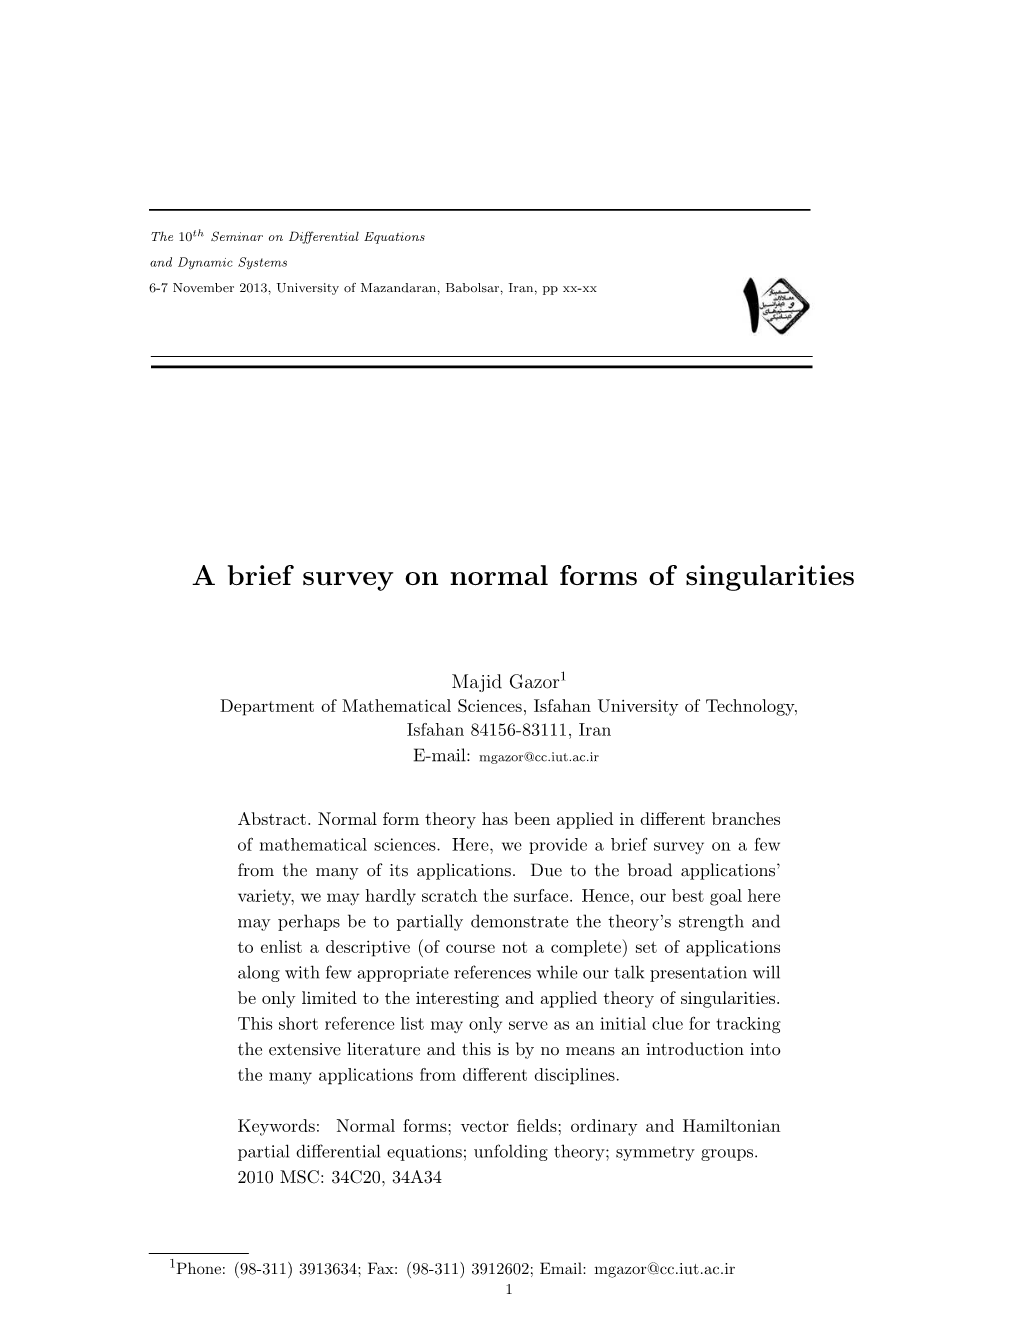 A Brief Survey on Normal Forms of Singularities